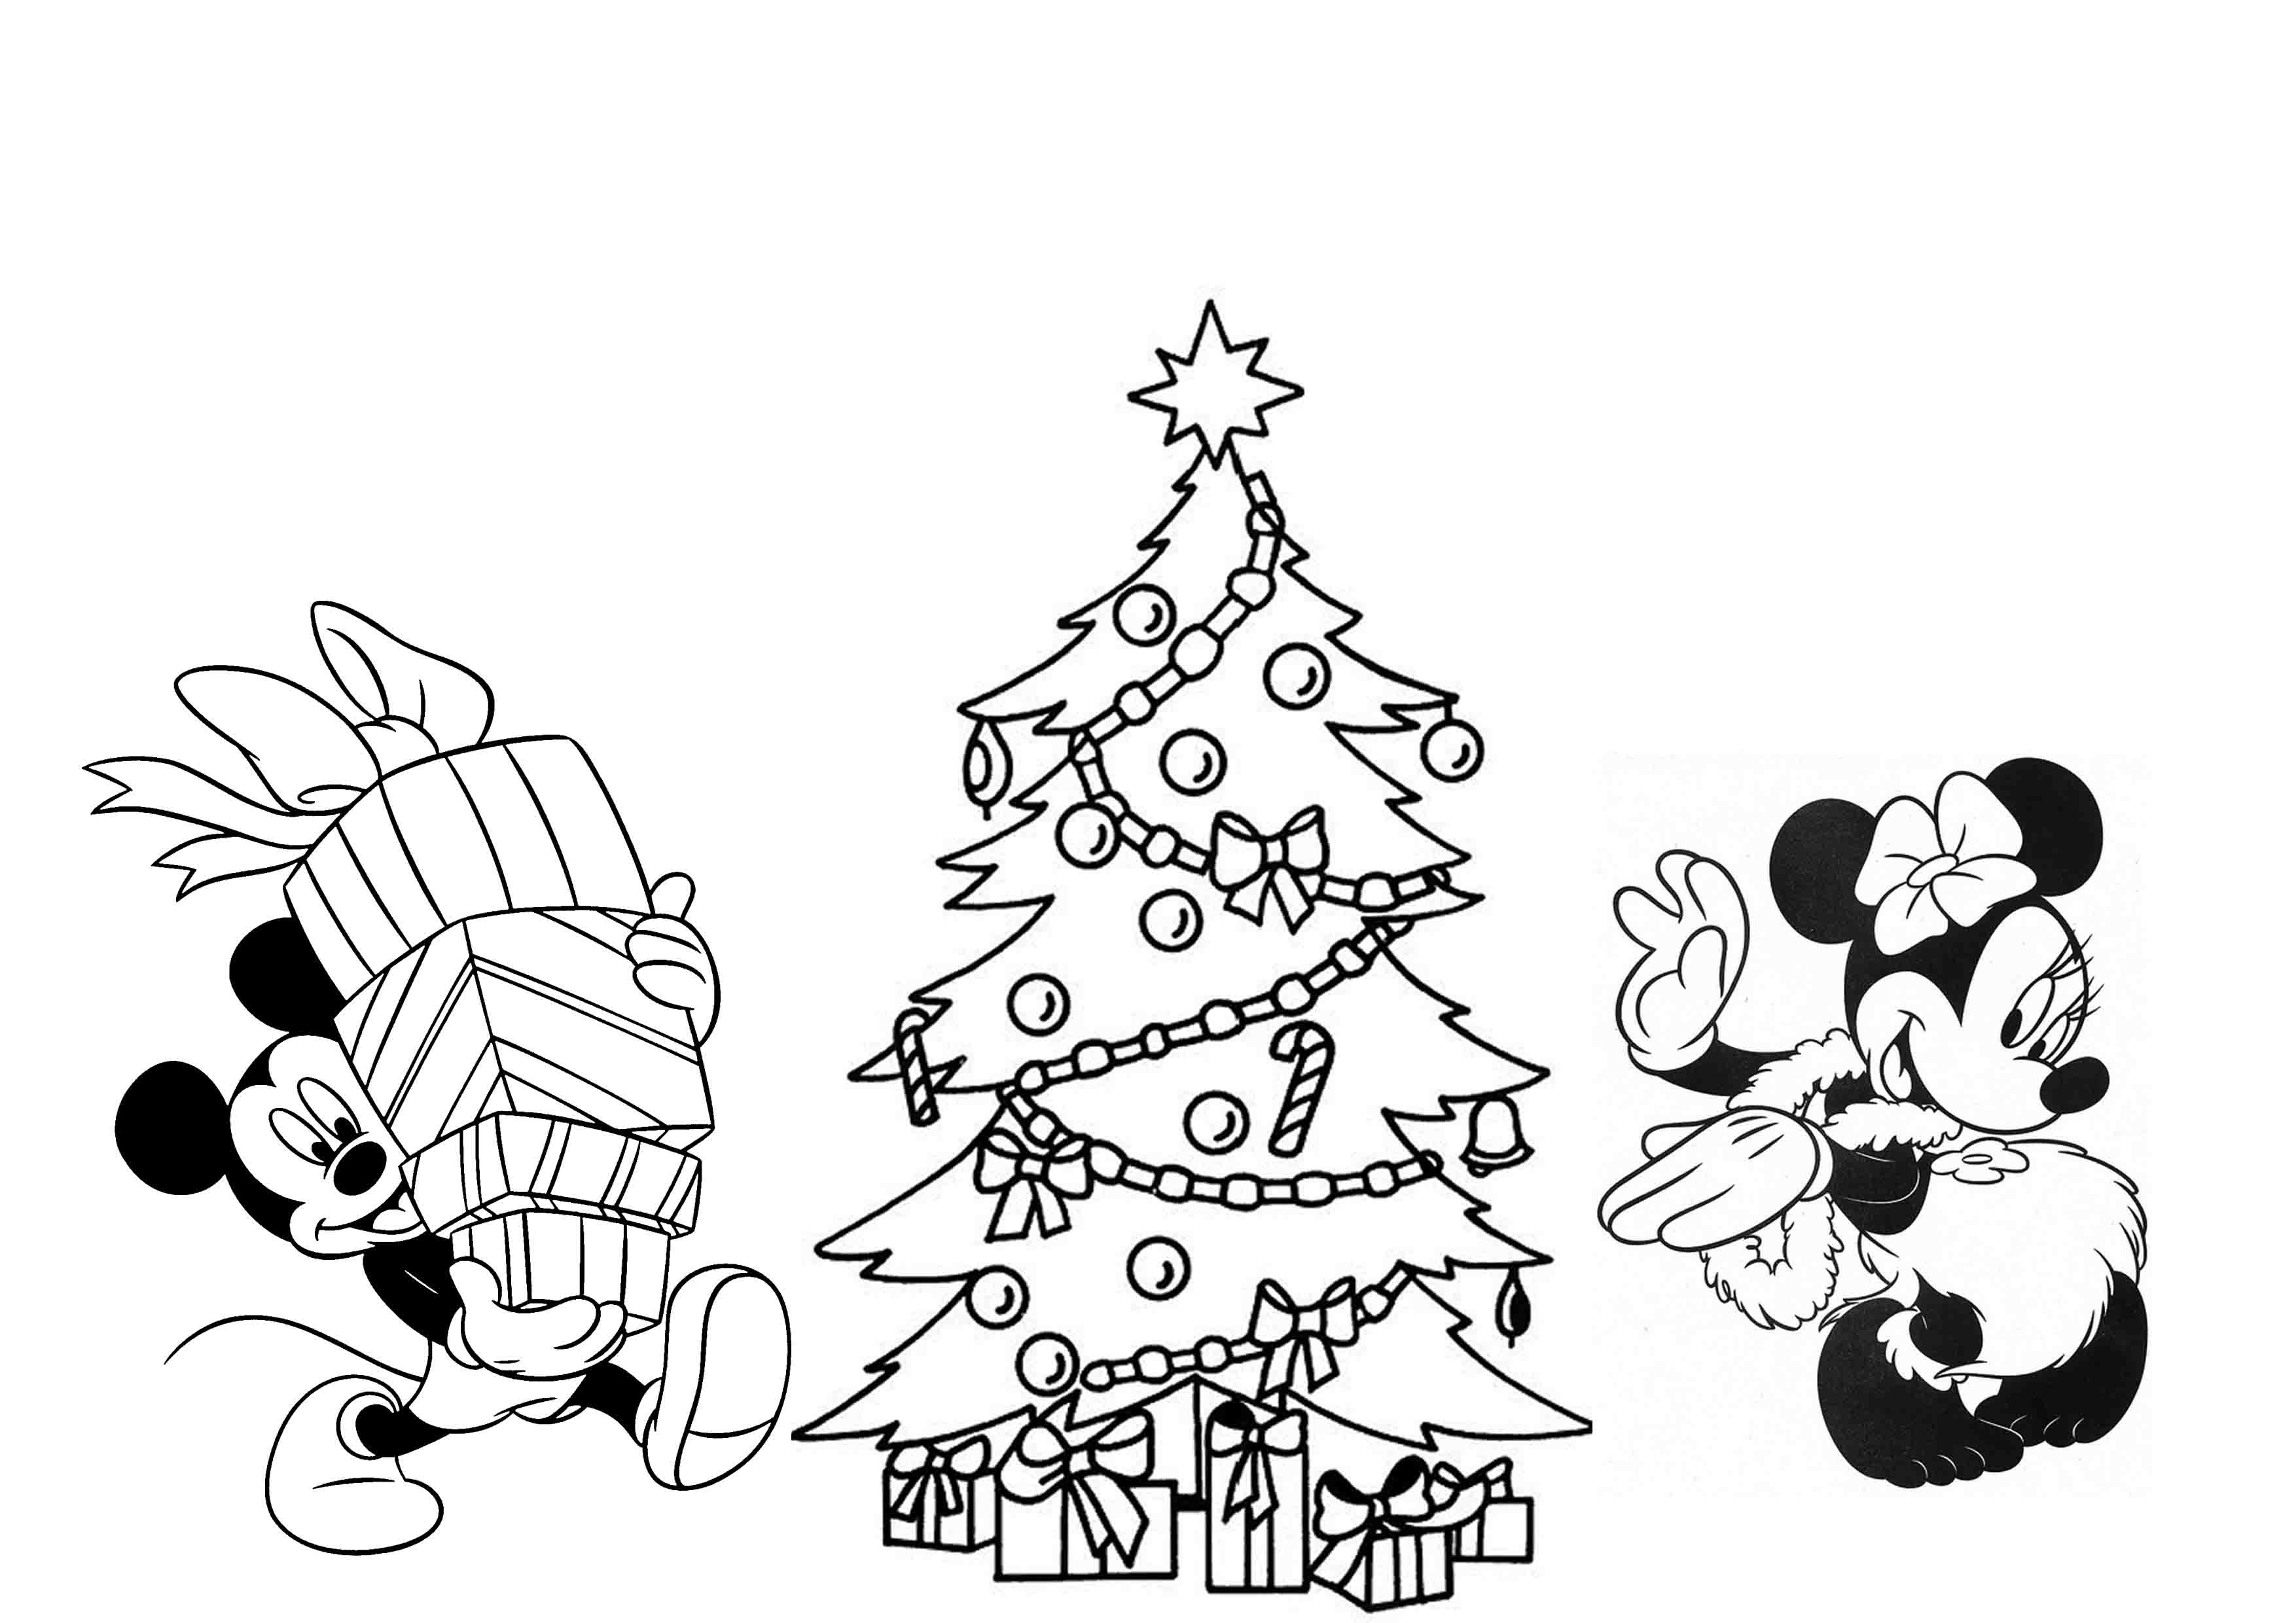 Coloring Pages : Print Download Printable Christmas Coloring Pages - Free Printable Christmas Coloring Pages And Activities